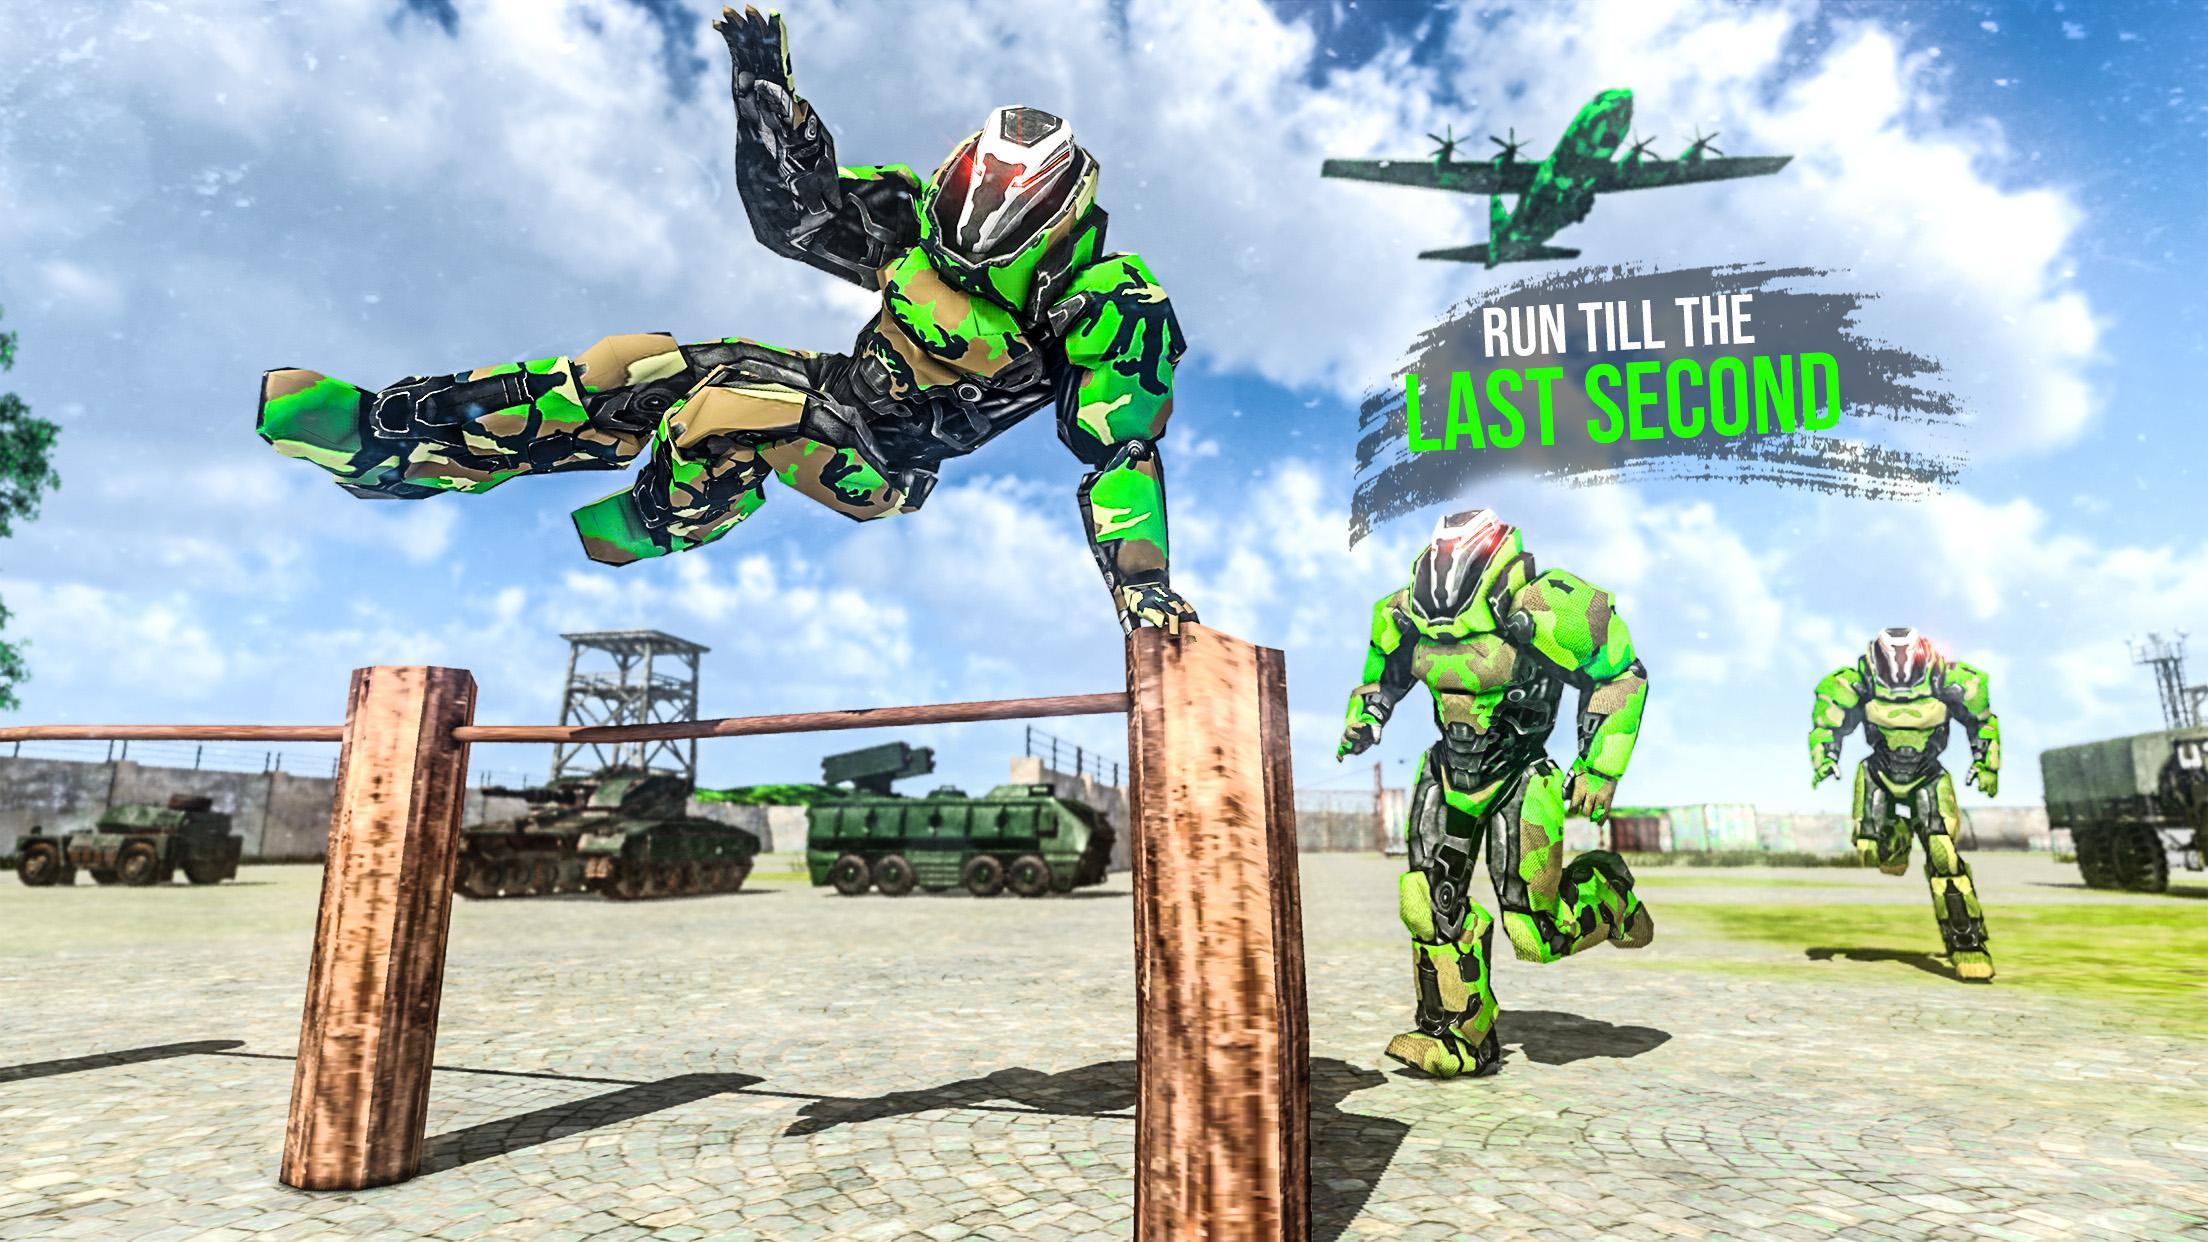 Us Army Robot Training Camp Special Force Course For Android Apk Download - aotp trainee camp roblox